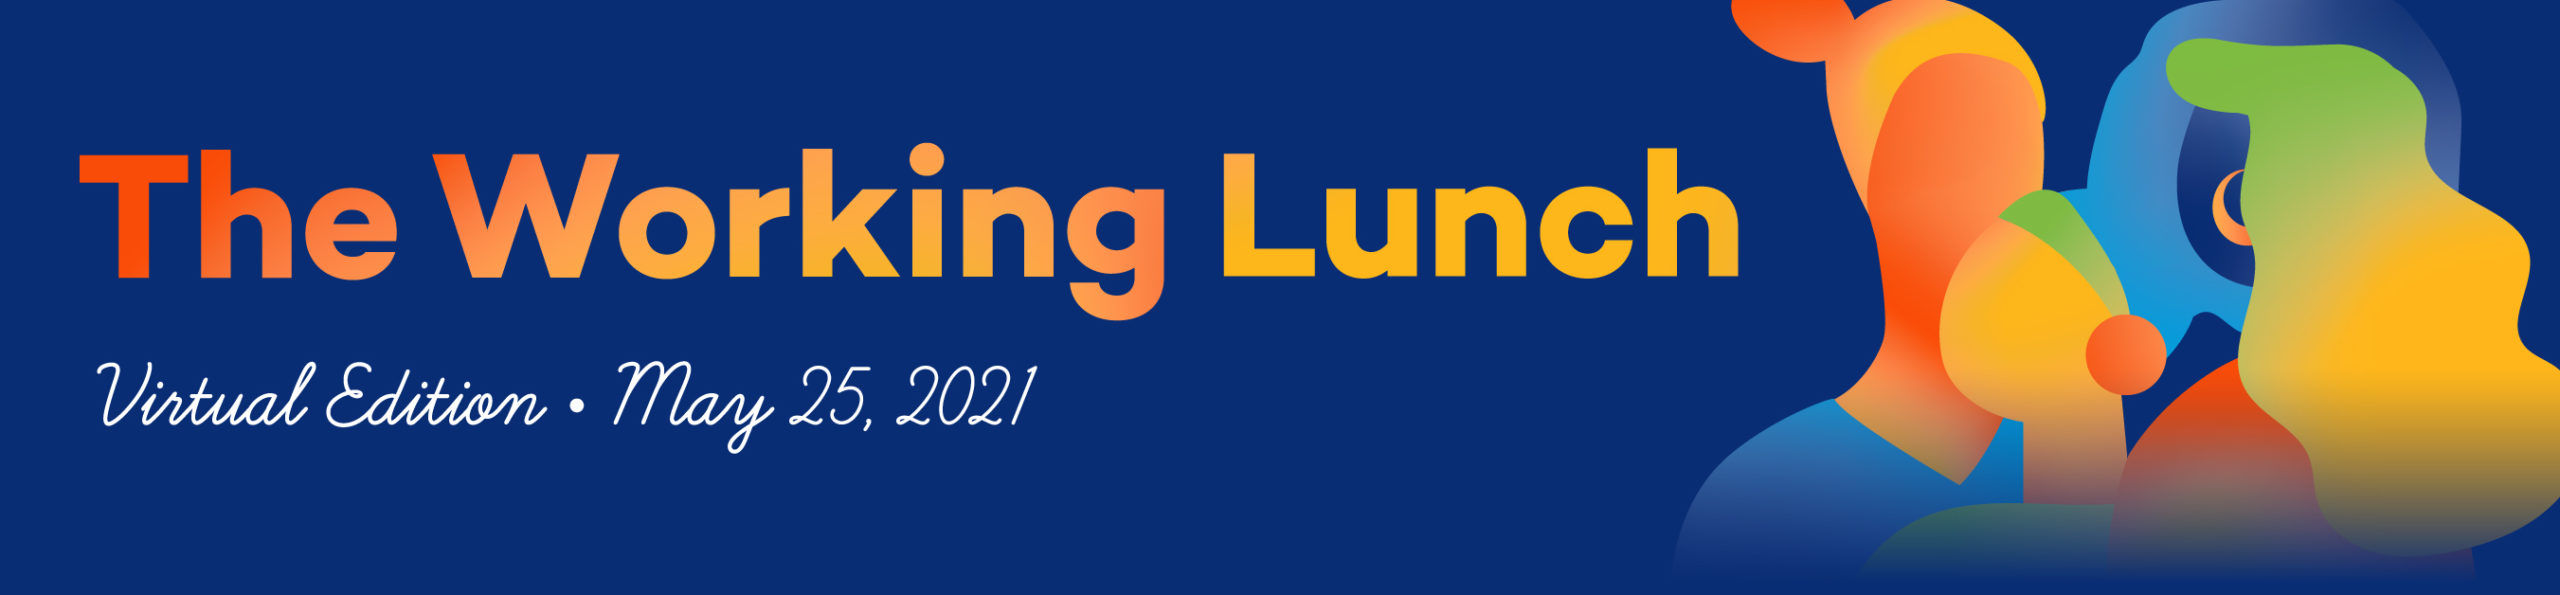 The Working Lunch, Virtual Edition, May 25, 2021